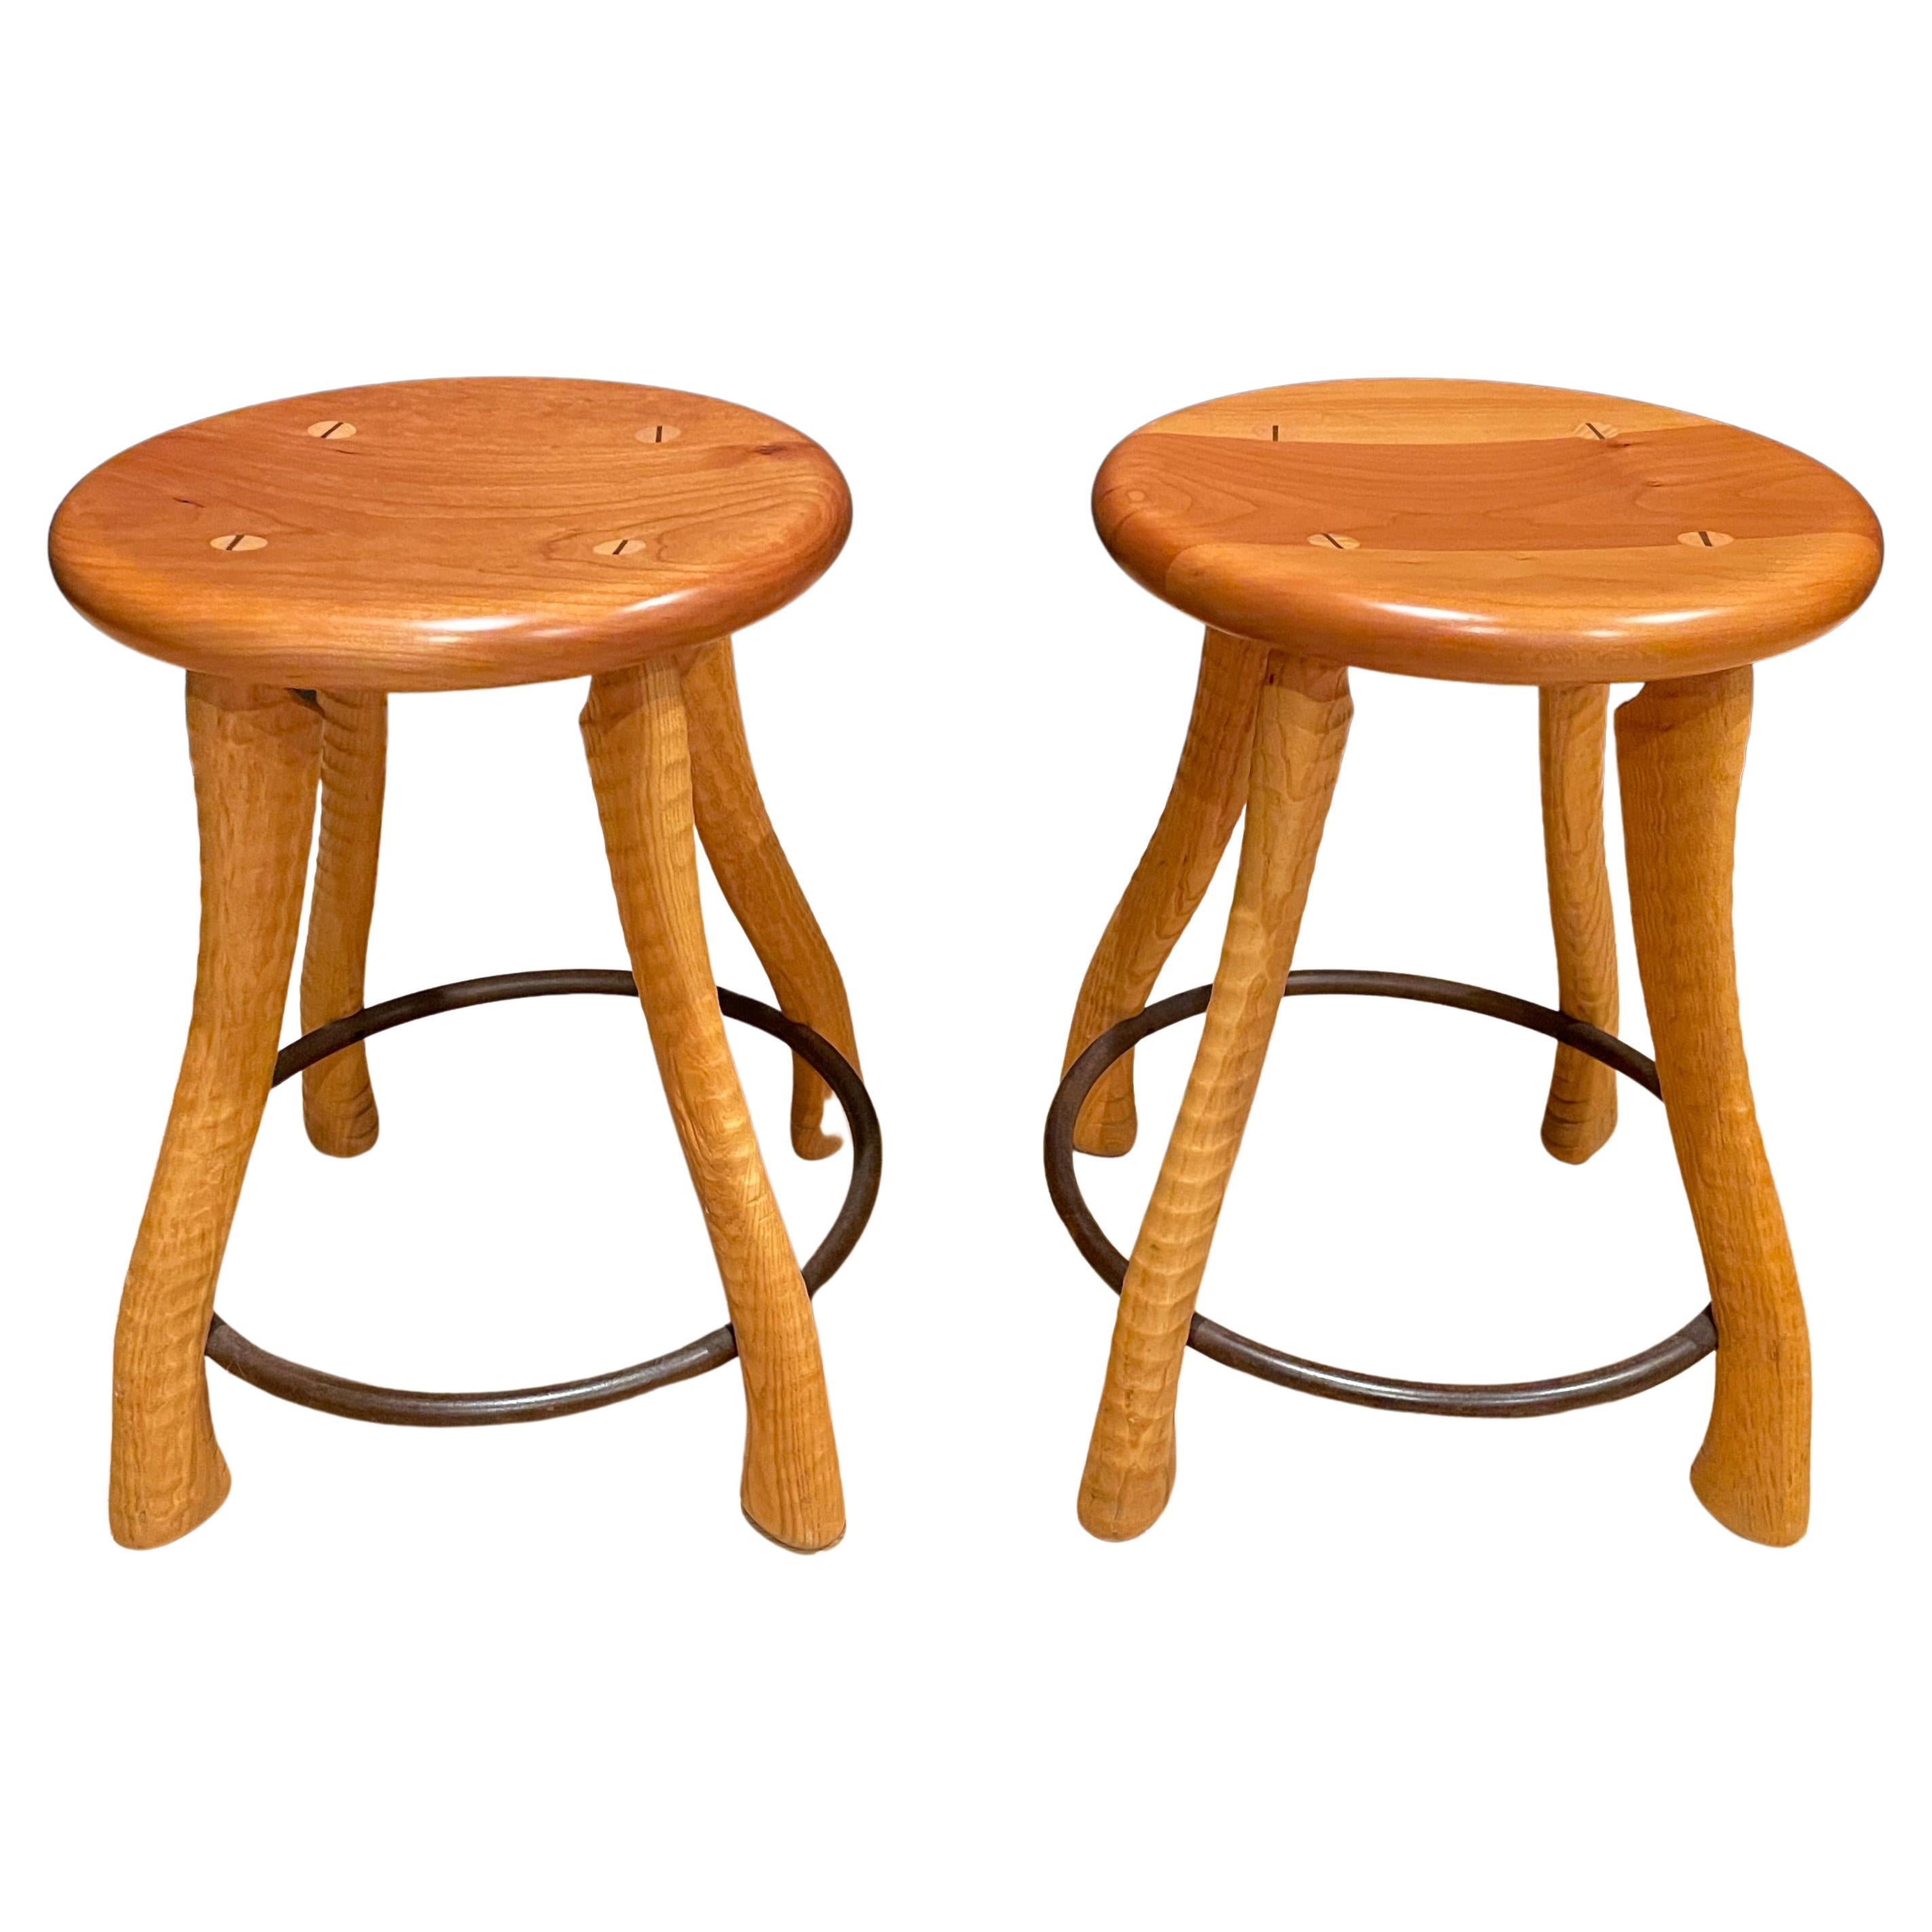 Bradford Woodworking Ax Handle Dining/Kitchen Stools For Sale